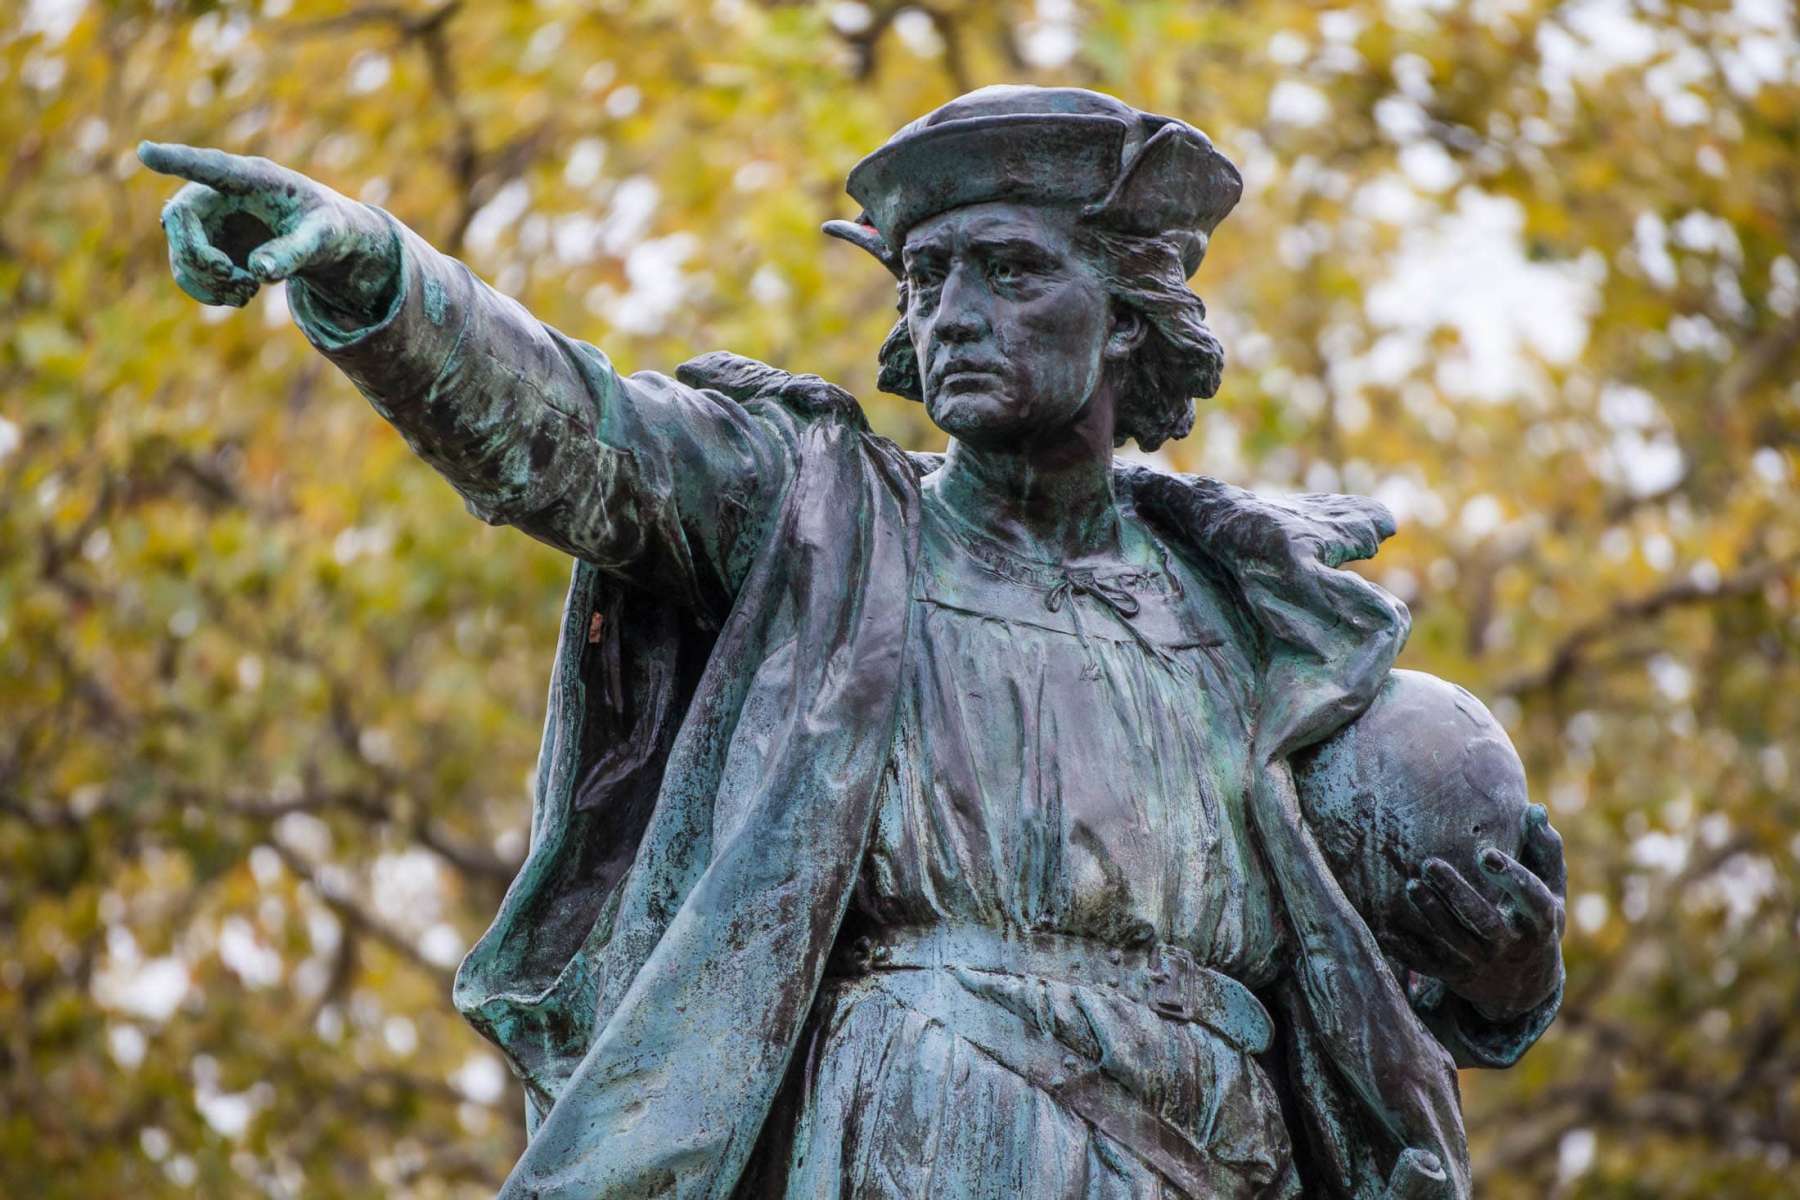 ACLU blasts PVD Police Department over charges filed against alleged Columbus statue vandals